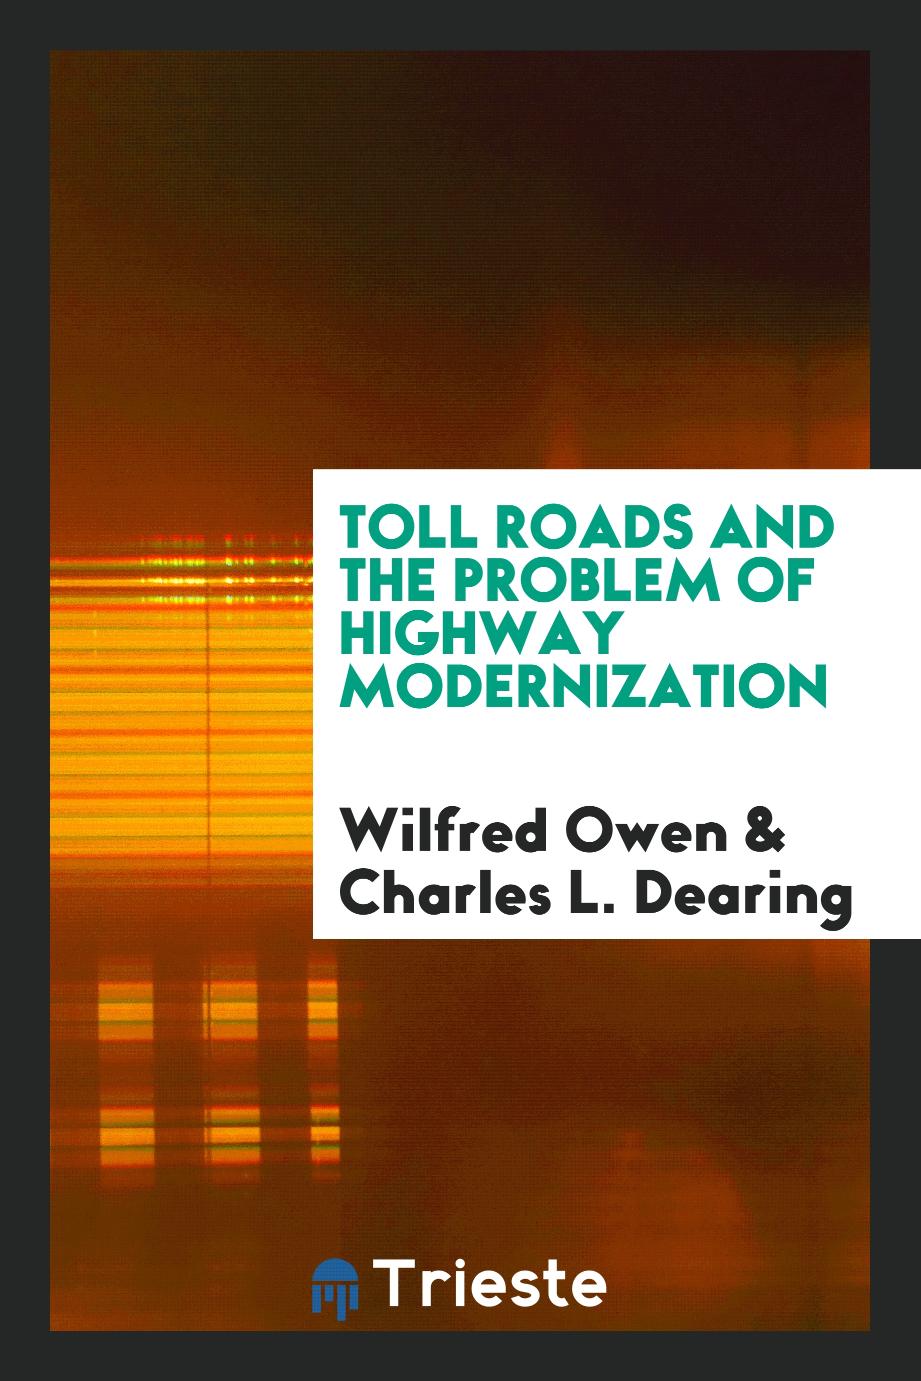 Toll roads and the problem of highway modernization